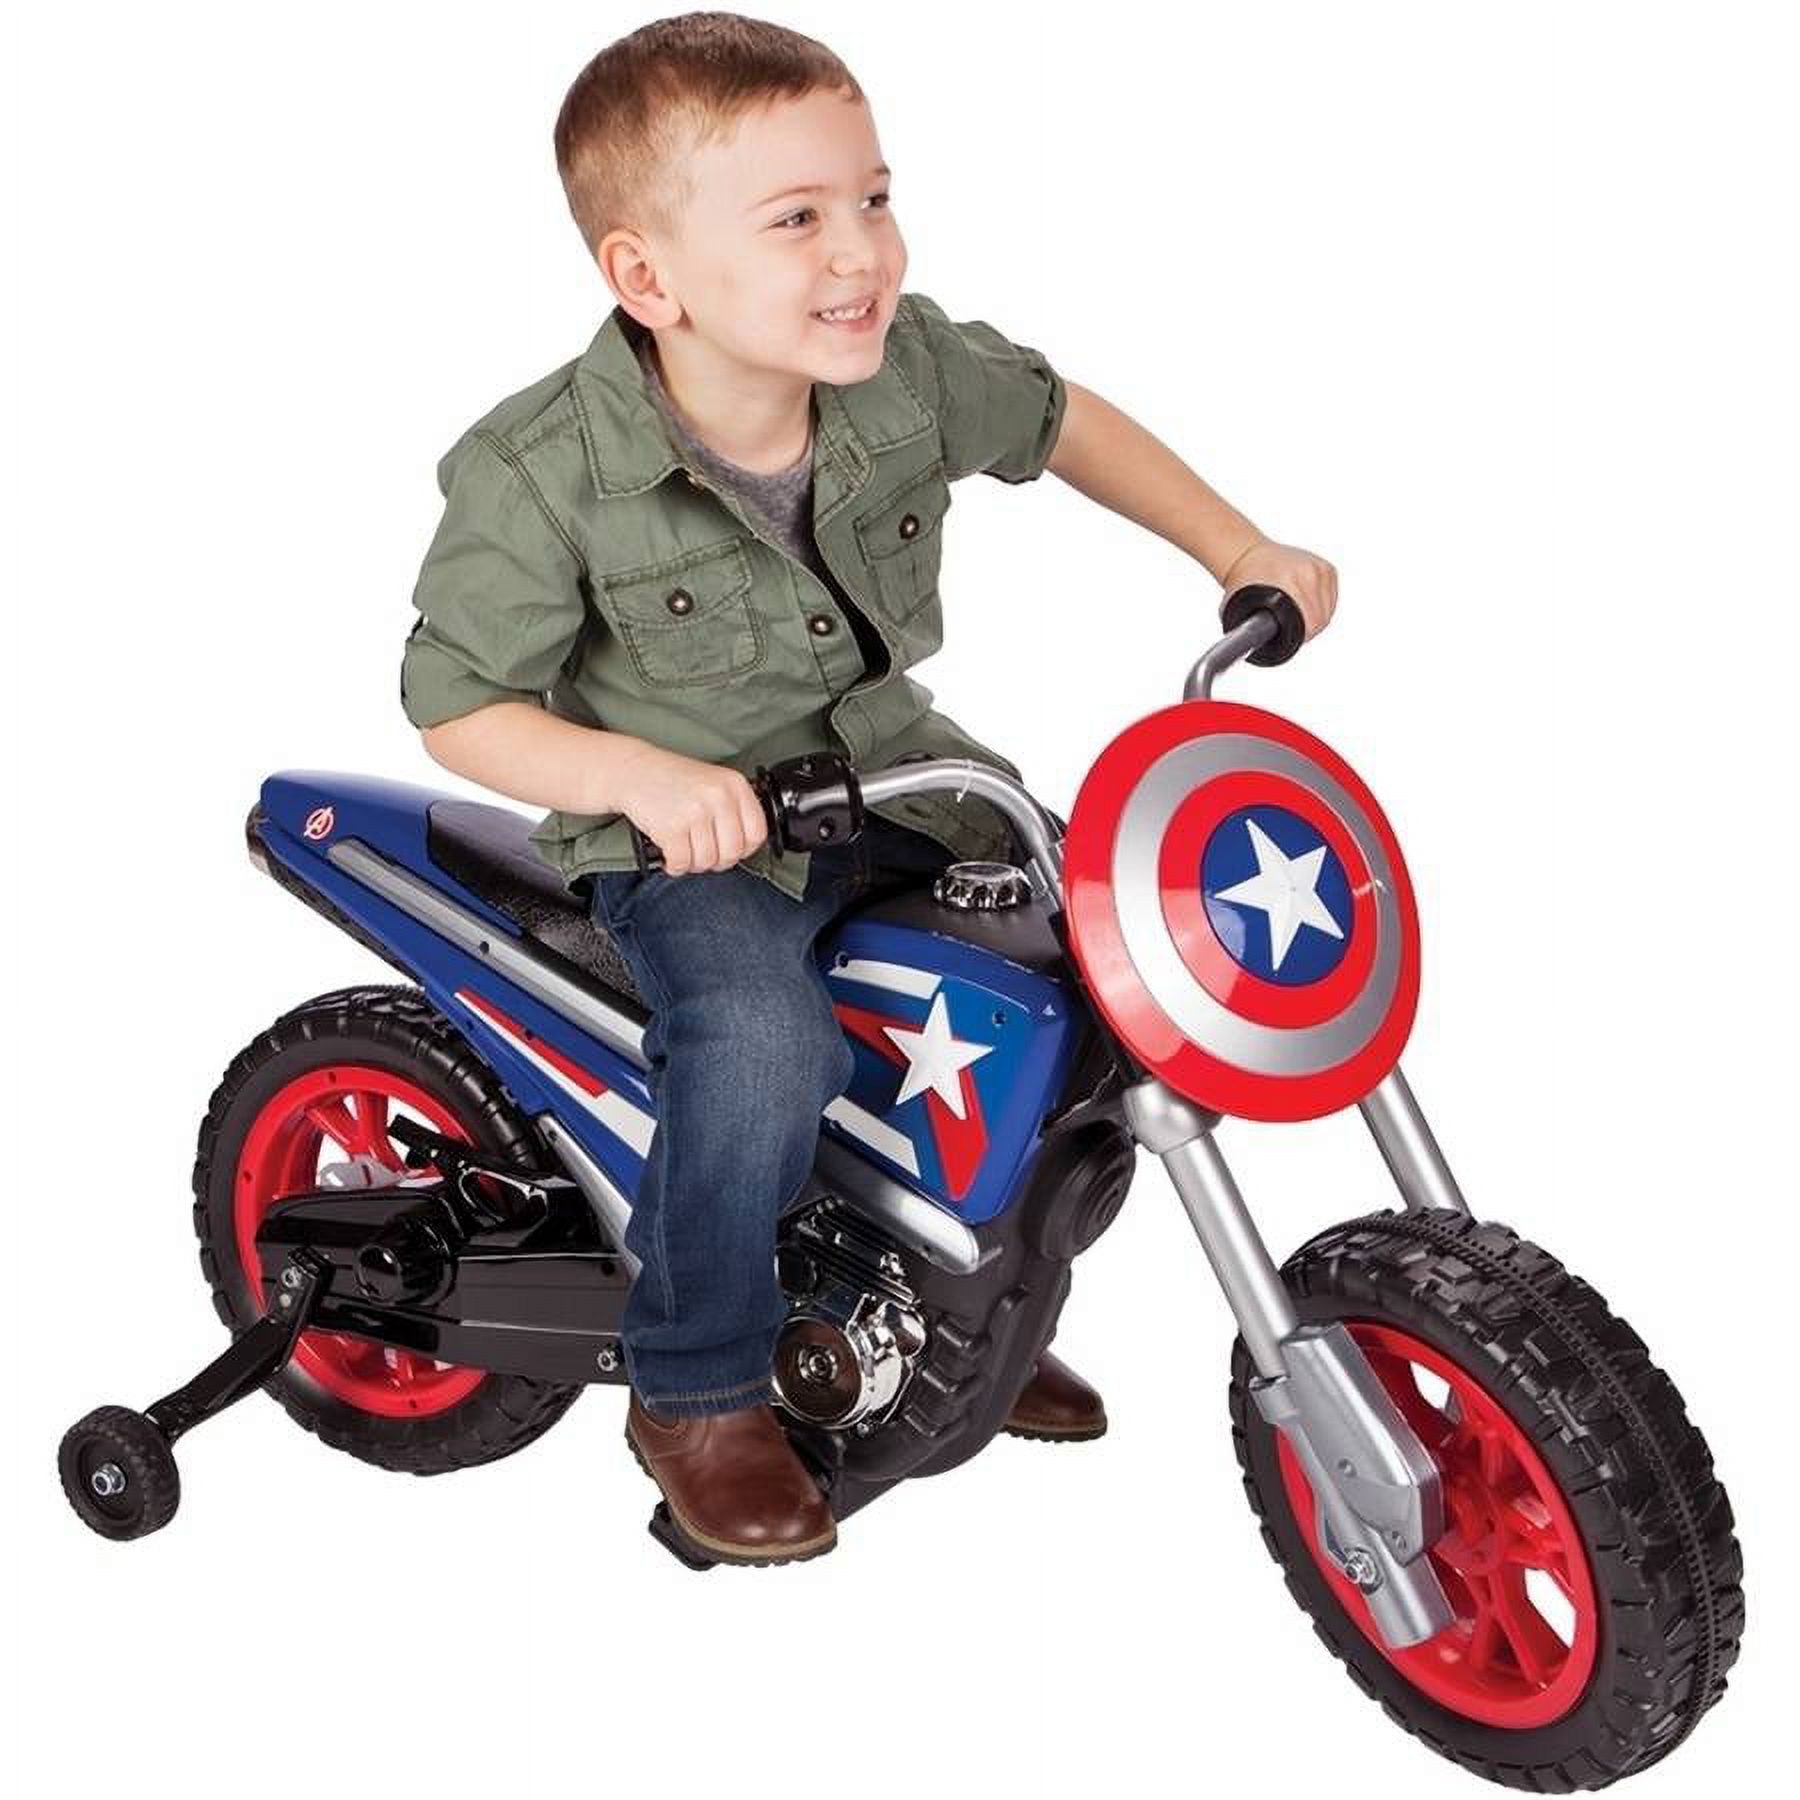 Captain America 6V Battery-Powered Ride-On Toy by Huffy - image 1 of 6